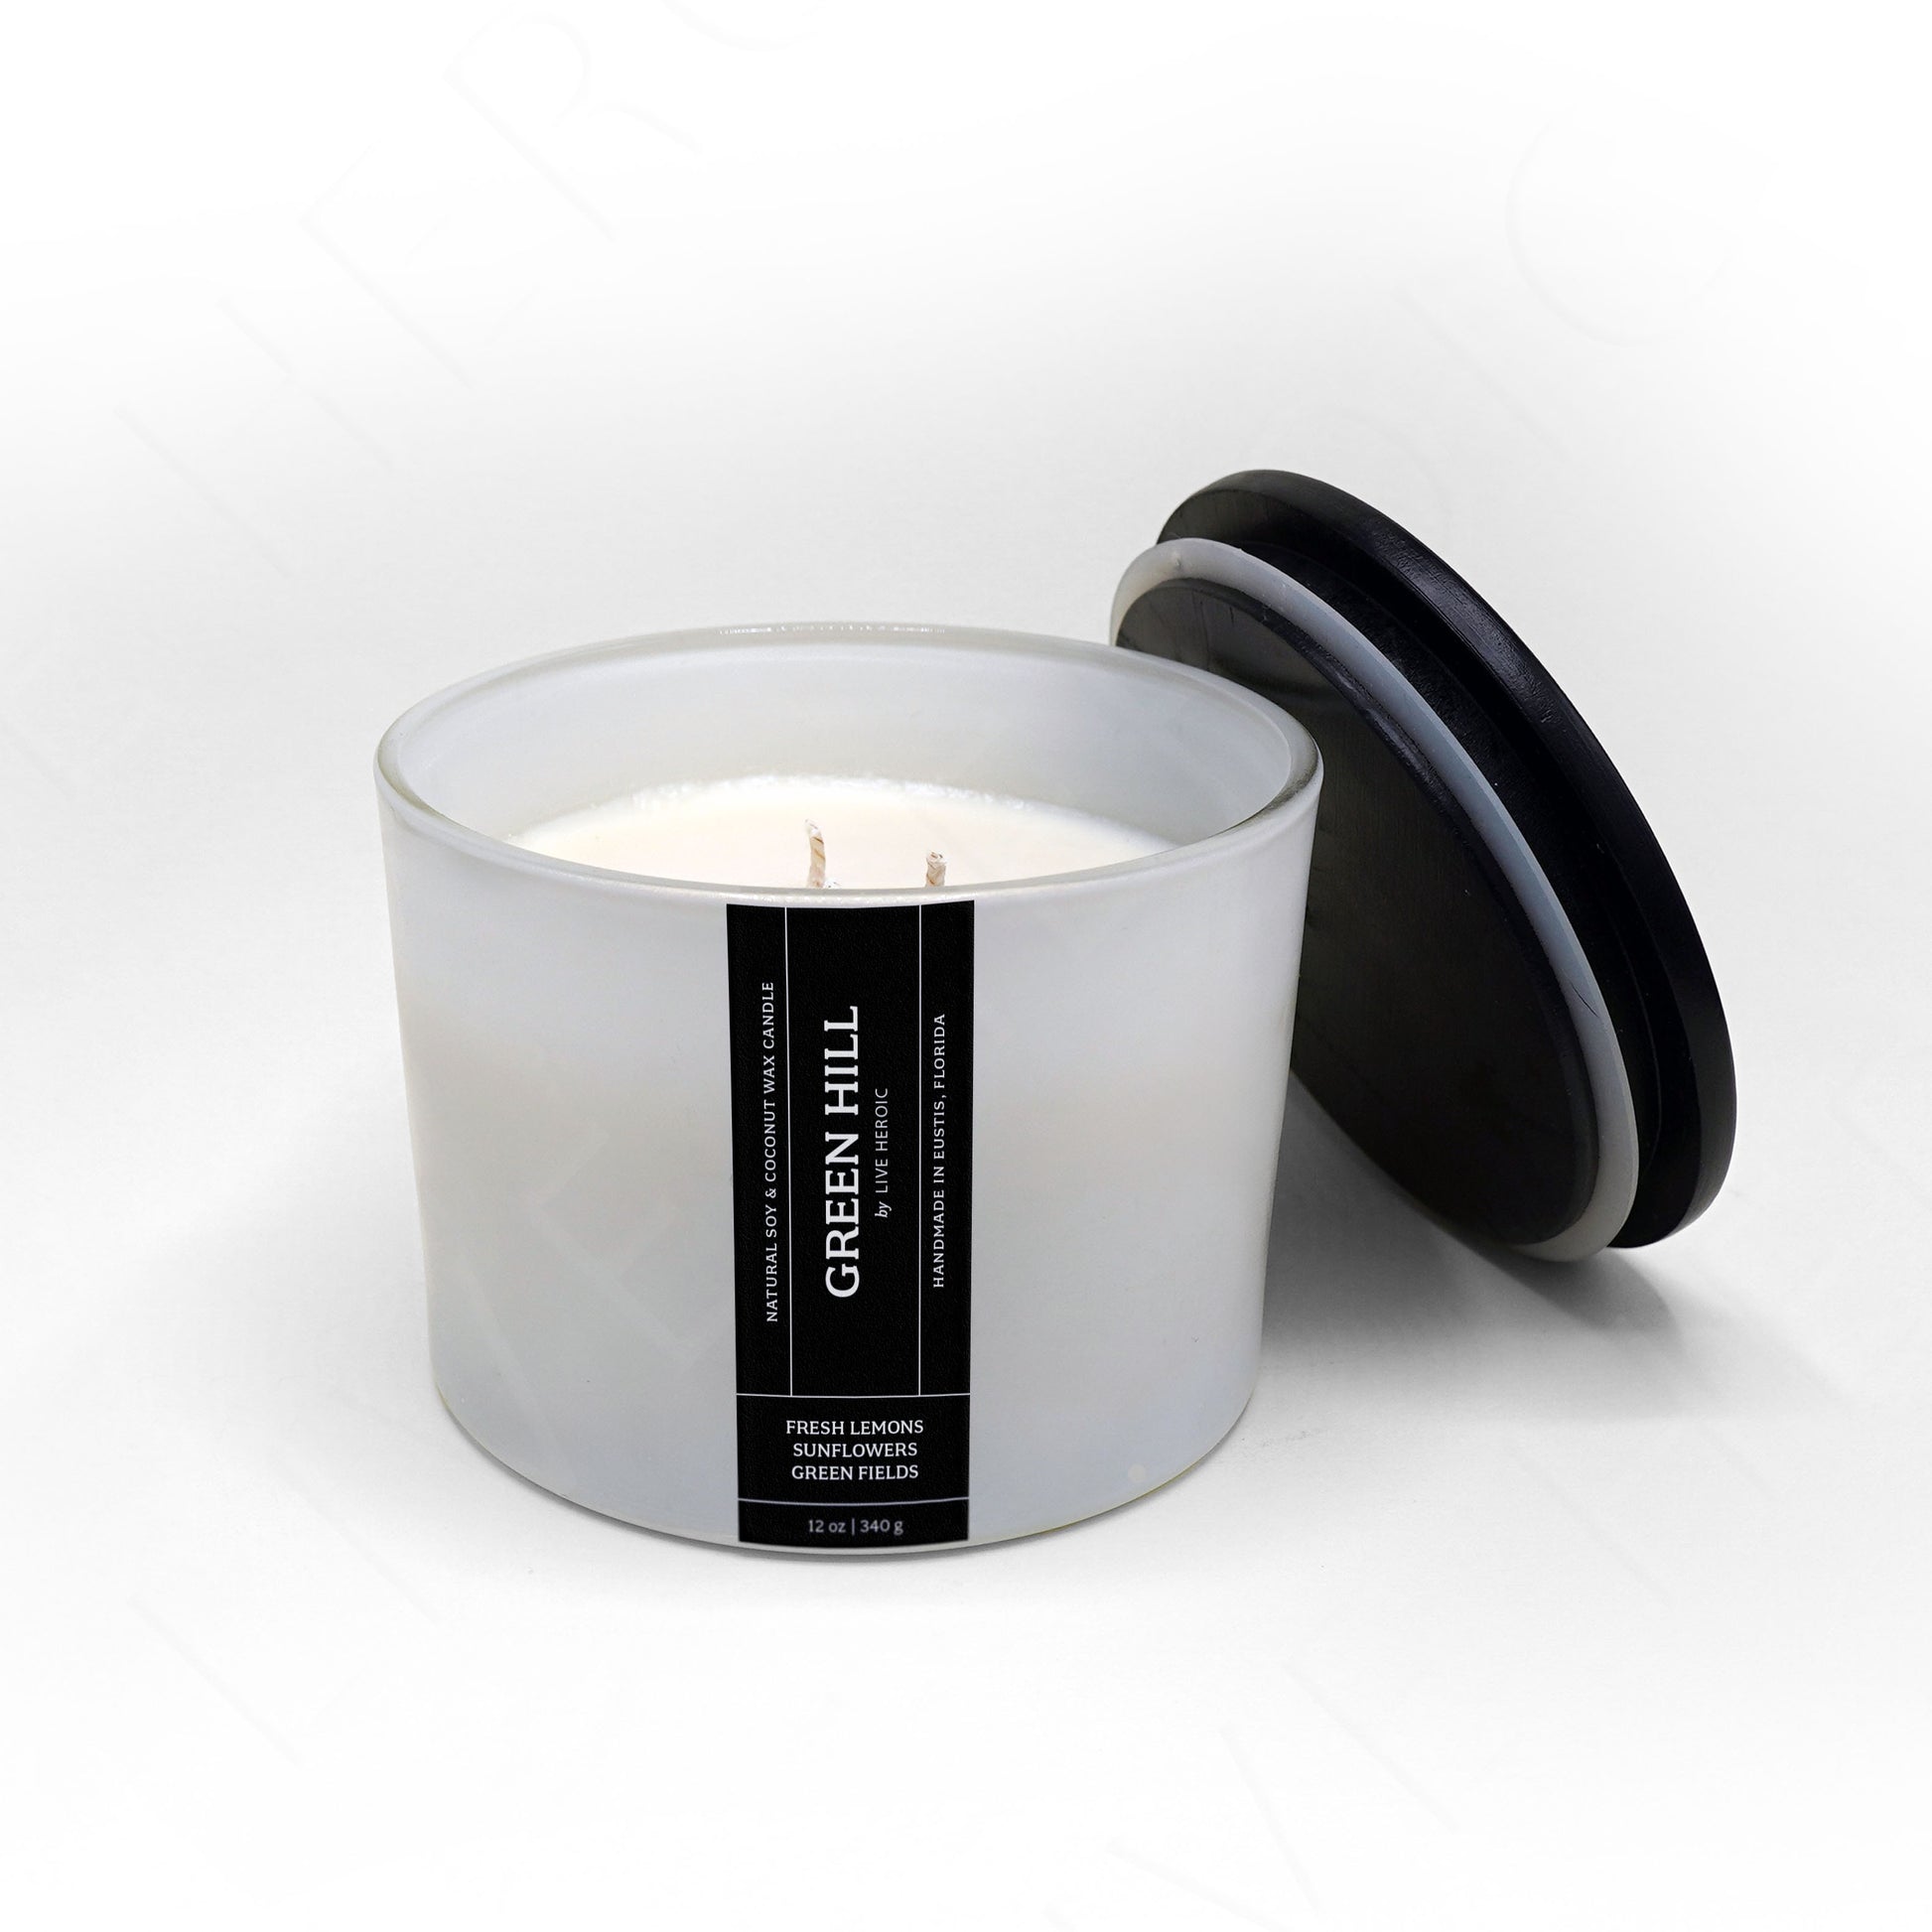 Green Hill | 12 oz Scented Coconut & Soy Wax Candle by Live Heroic